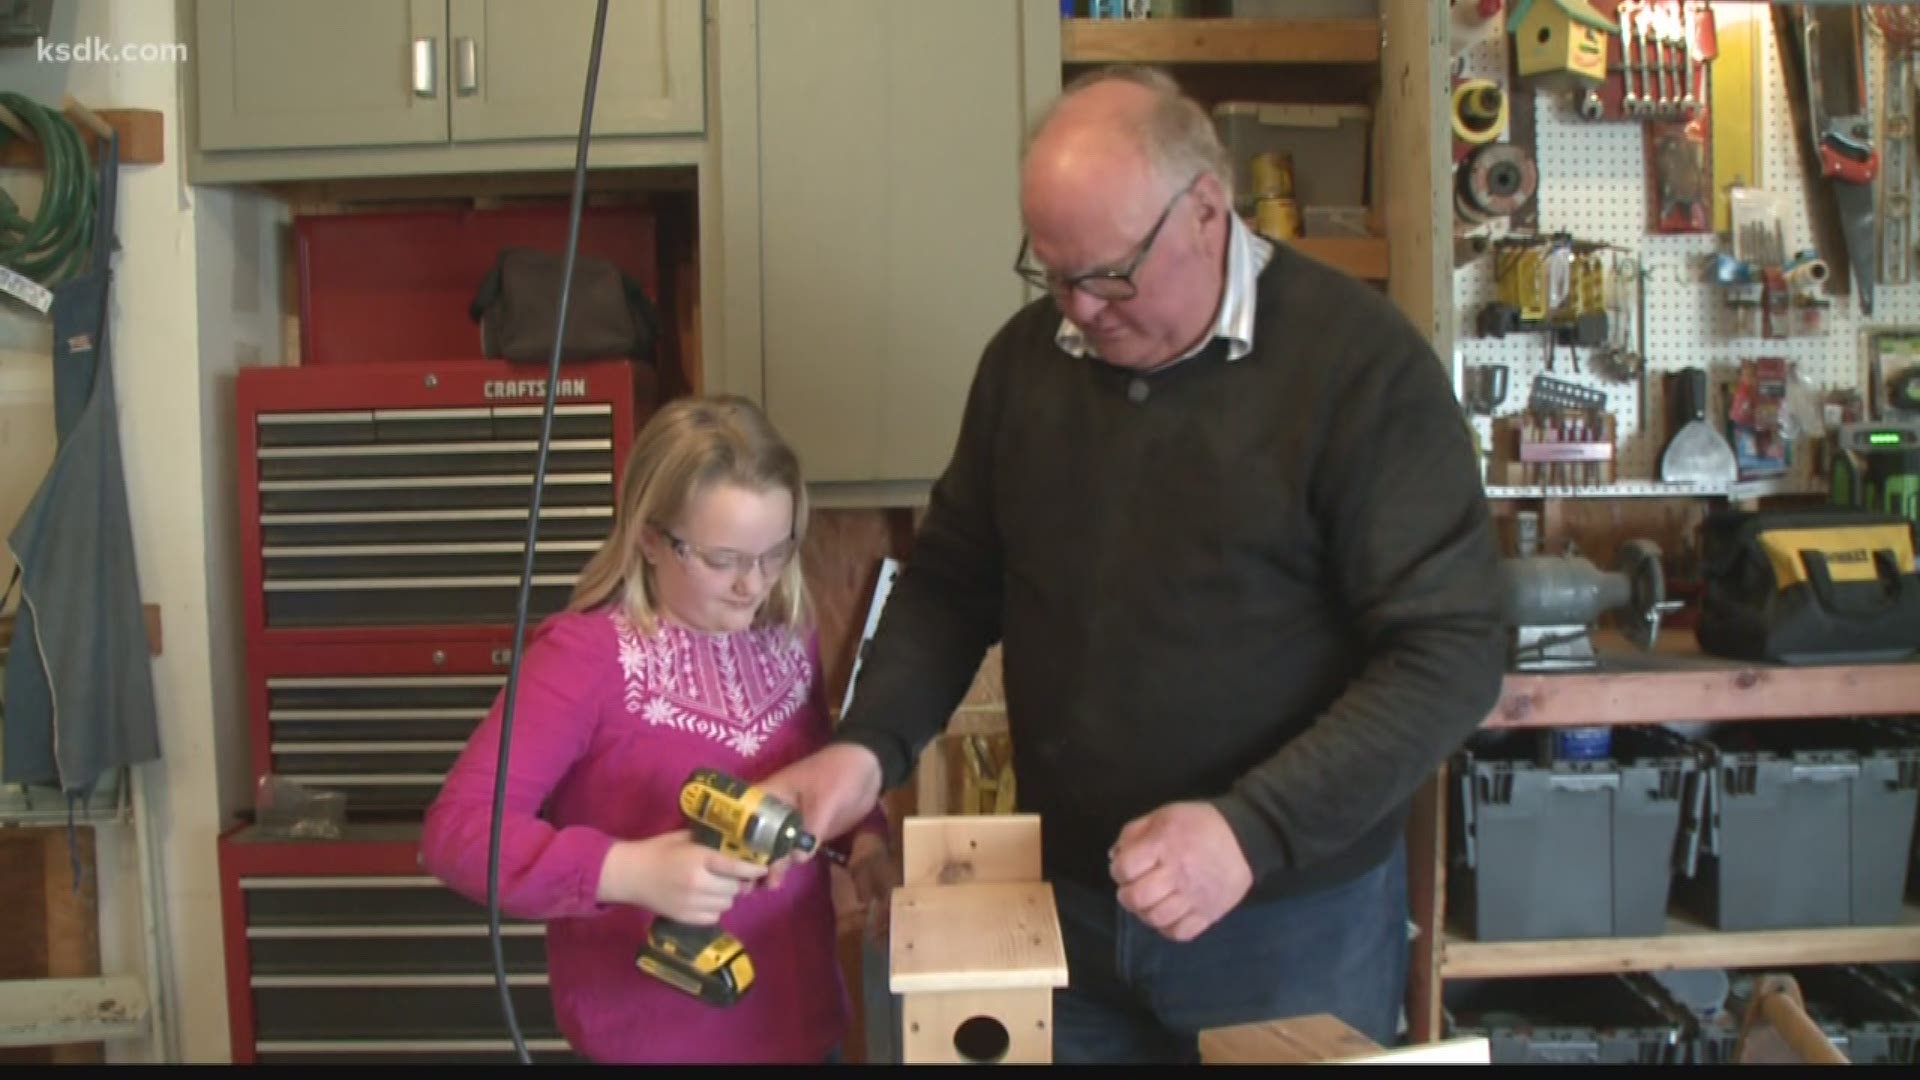 Anna may still be a little girl, but she has a big heart and she enlisted her grandpa to build a Giving Box to help other families in her hometown